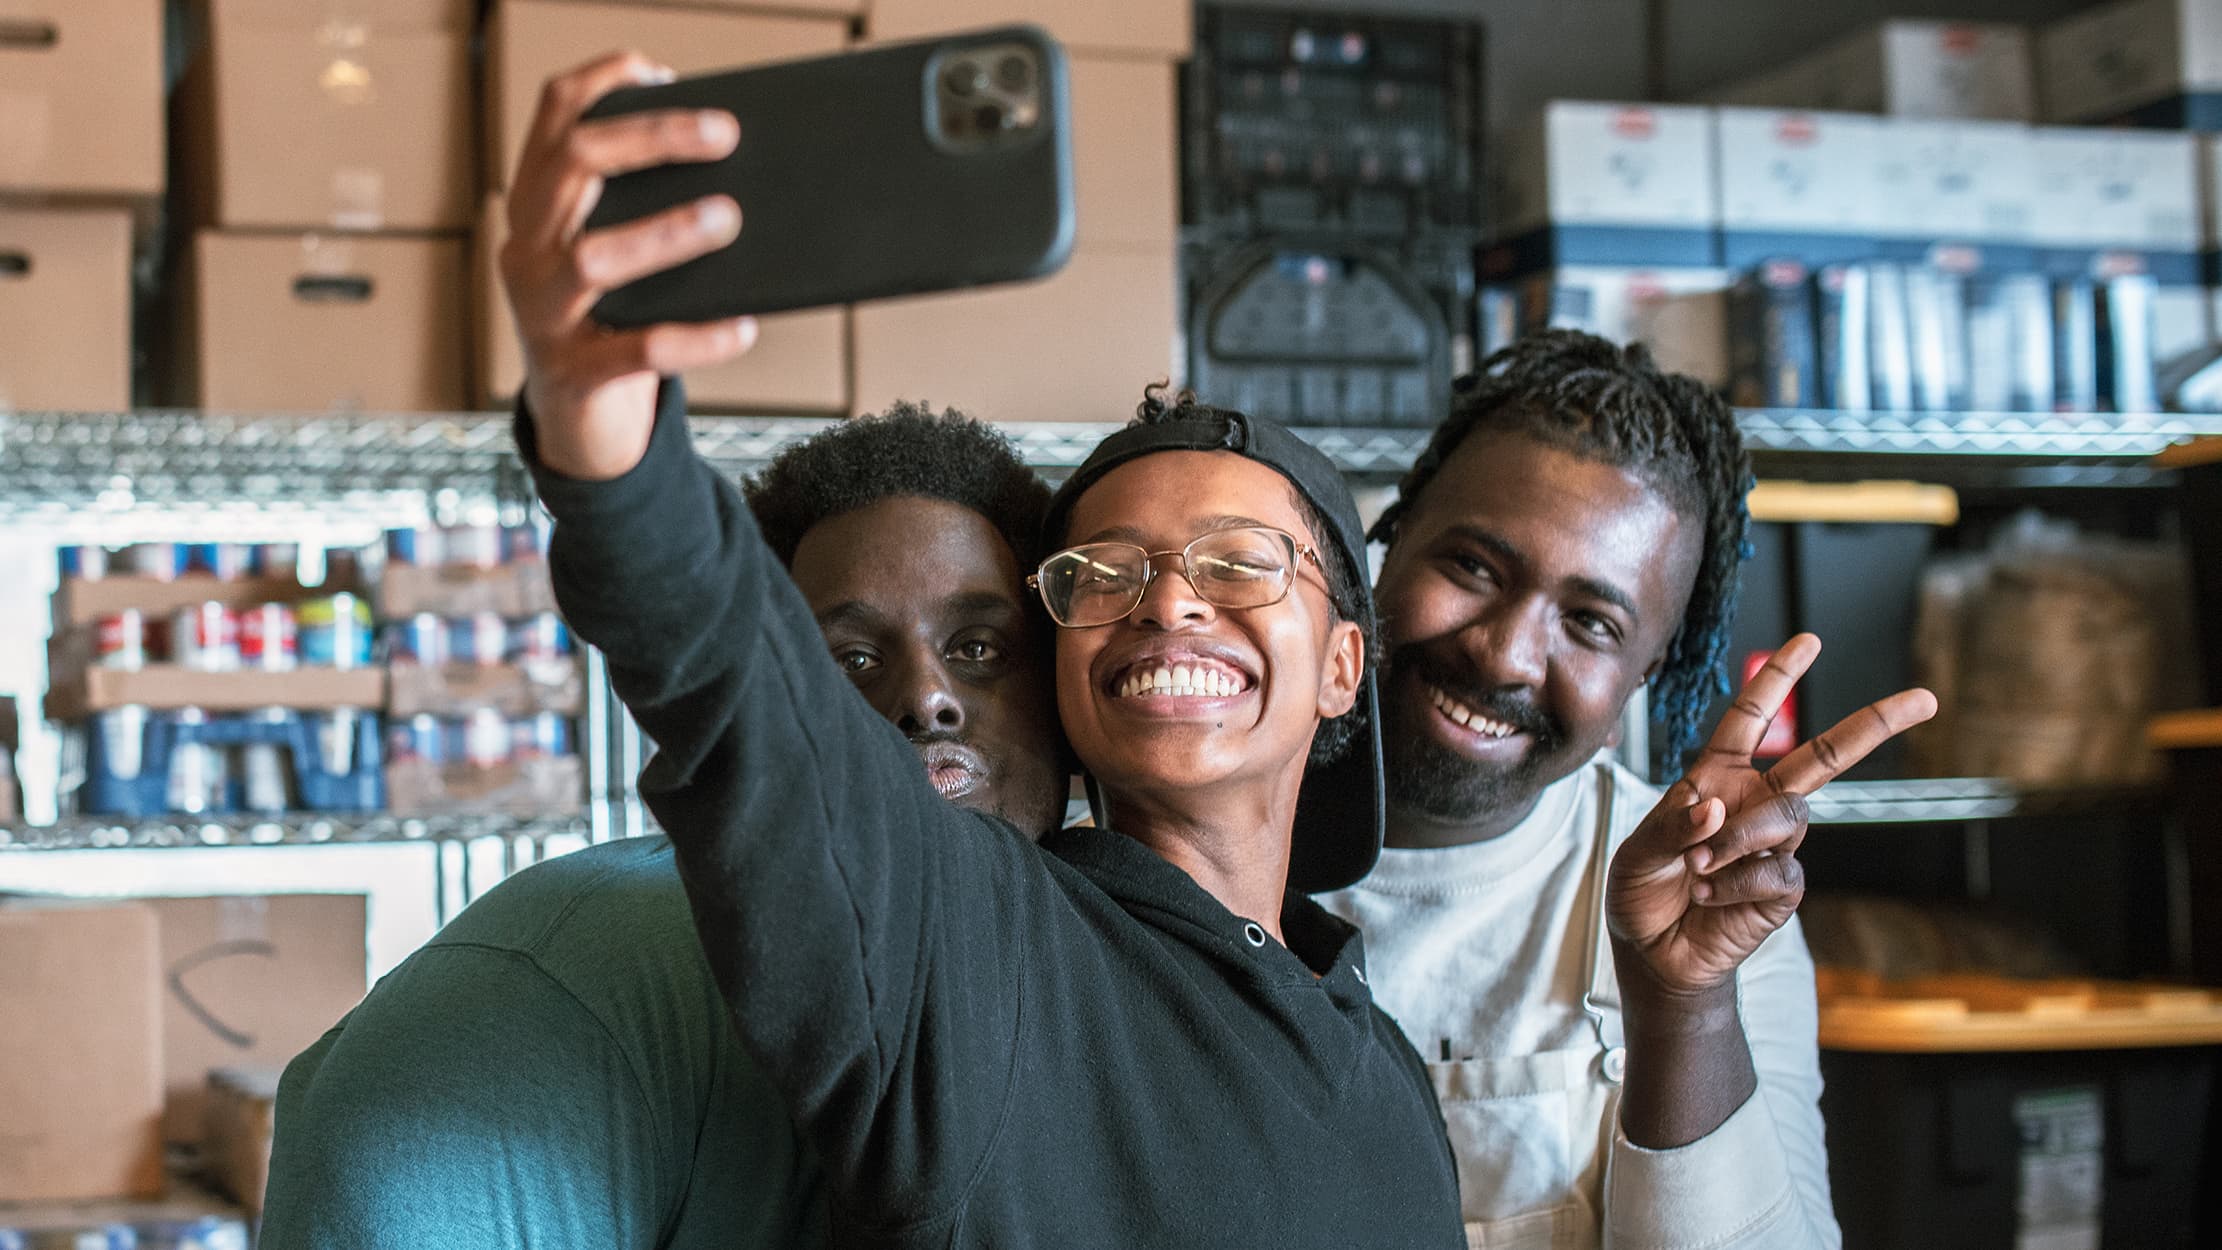 Boy talking a selfie with Black family